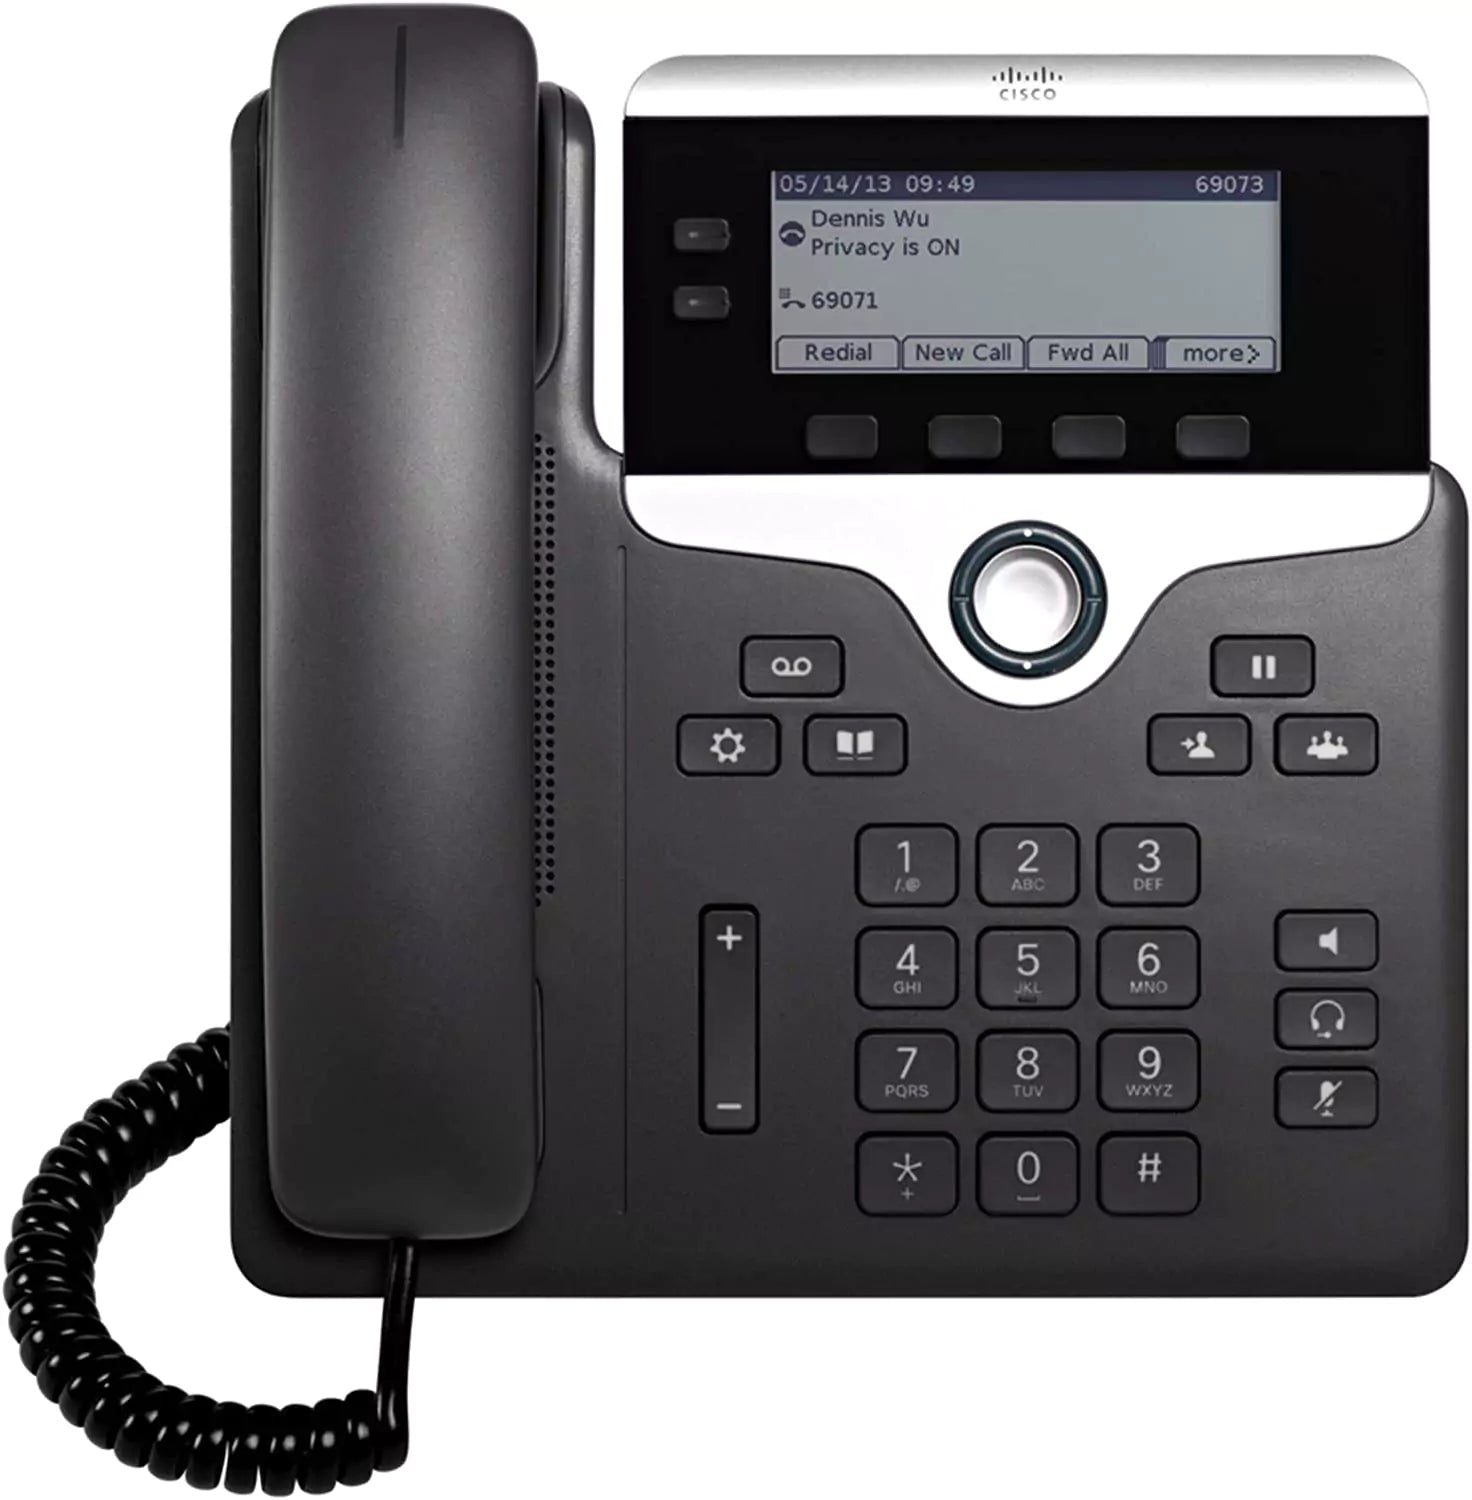 Cisco CP-7821 2-line IP telephone with ergonomic design 3.5″ display PoE Ethernet port perfect for reception and hall